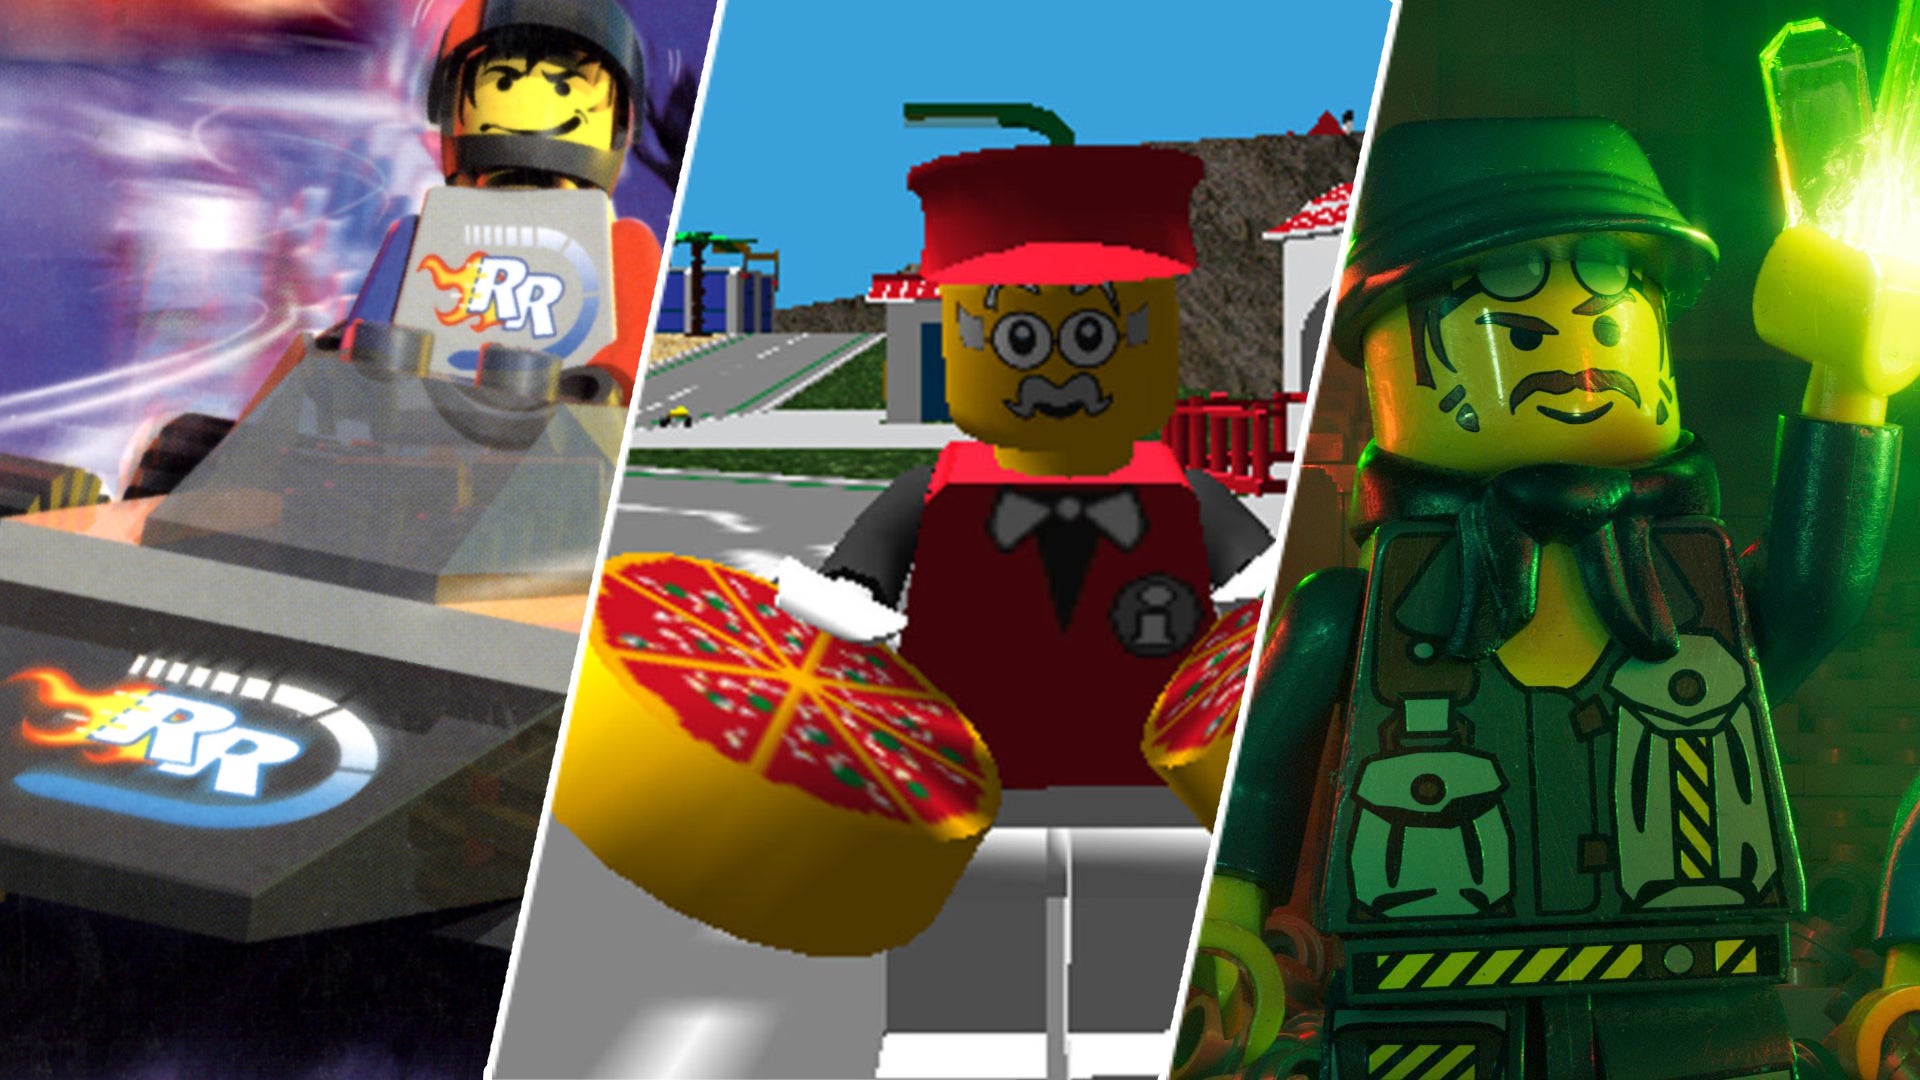 Image for Lego 2K Drive: I’m in for a new Lego Racing game no questions asked – but what we really need is Lego Island